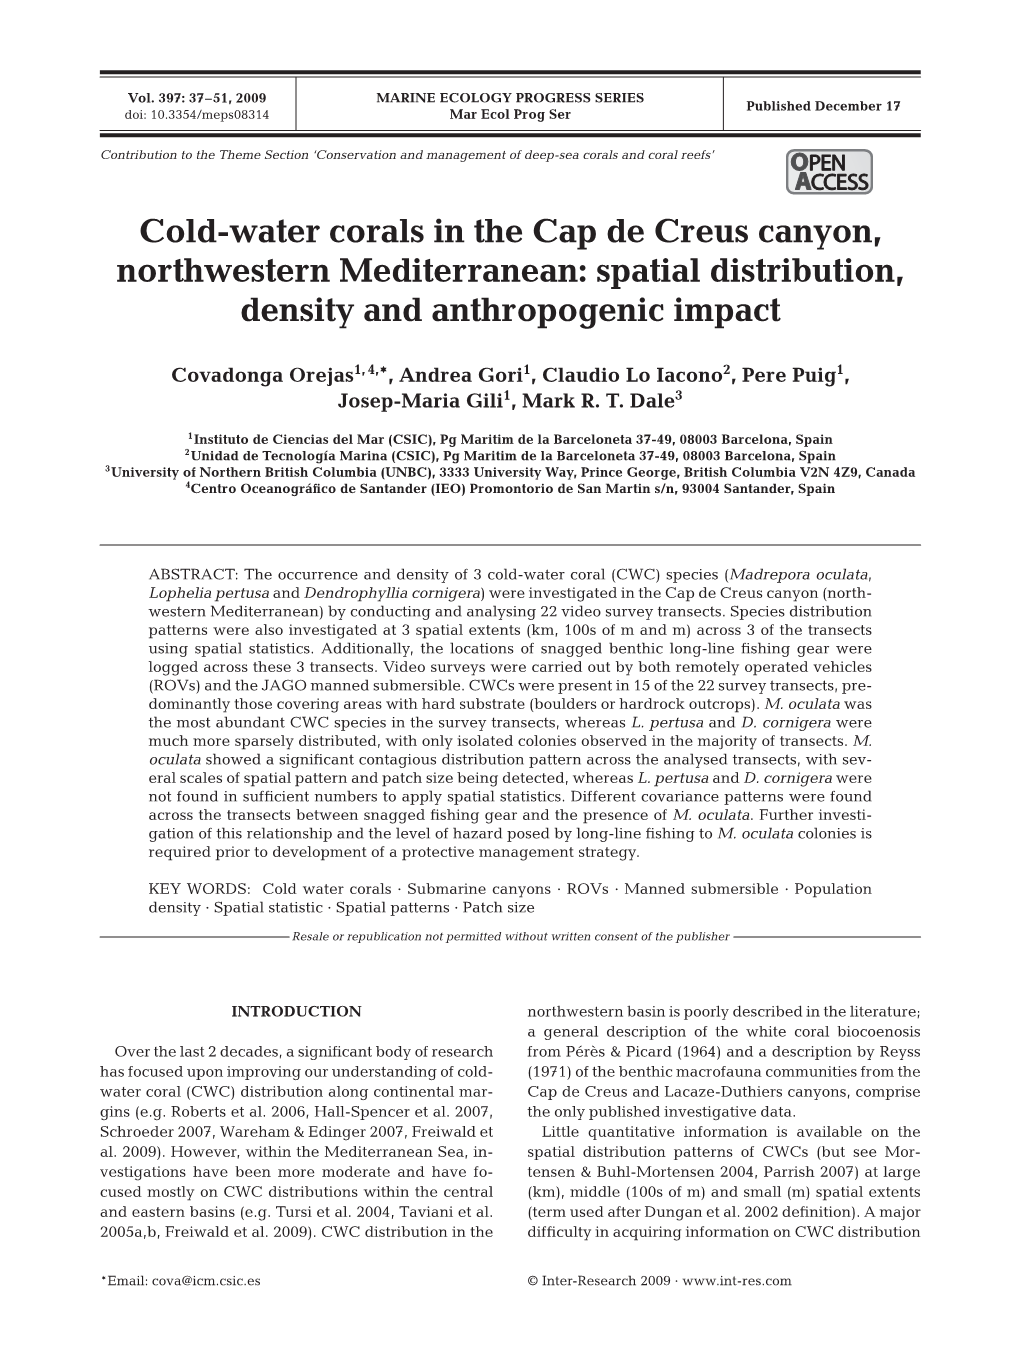 Cold-Water Corals in the Cap De Creus Canyon, Northwestern Mediterranean: Spatial Distribution, Density and Anthropogenic Impact